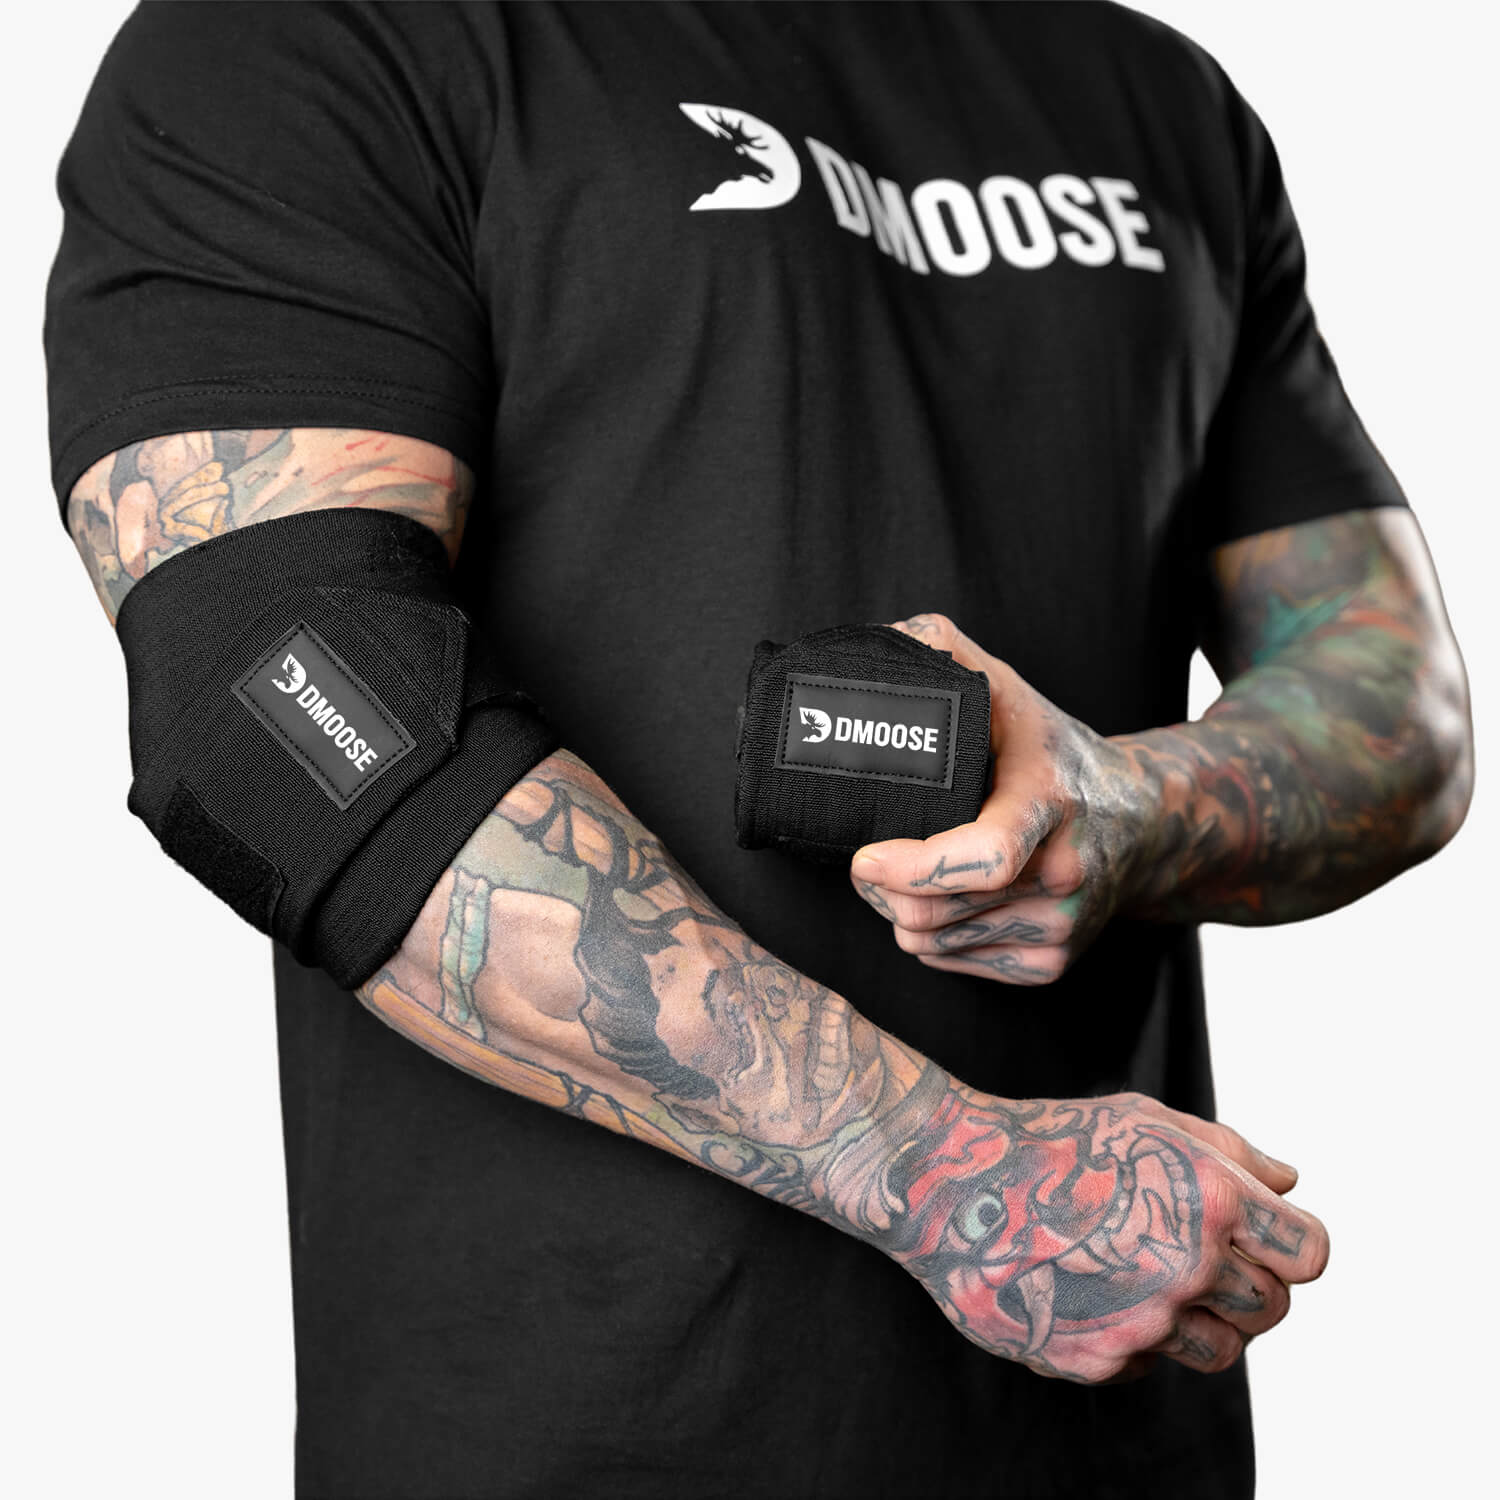 Elbow Sleeves, What Are They Good For & Should You Be Using Them?